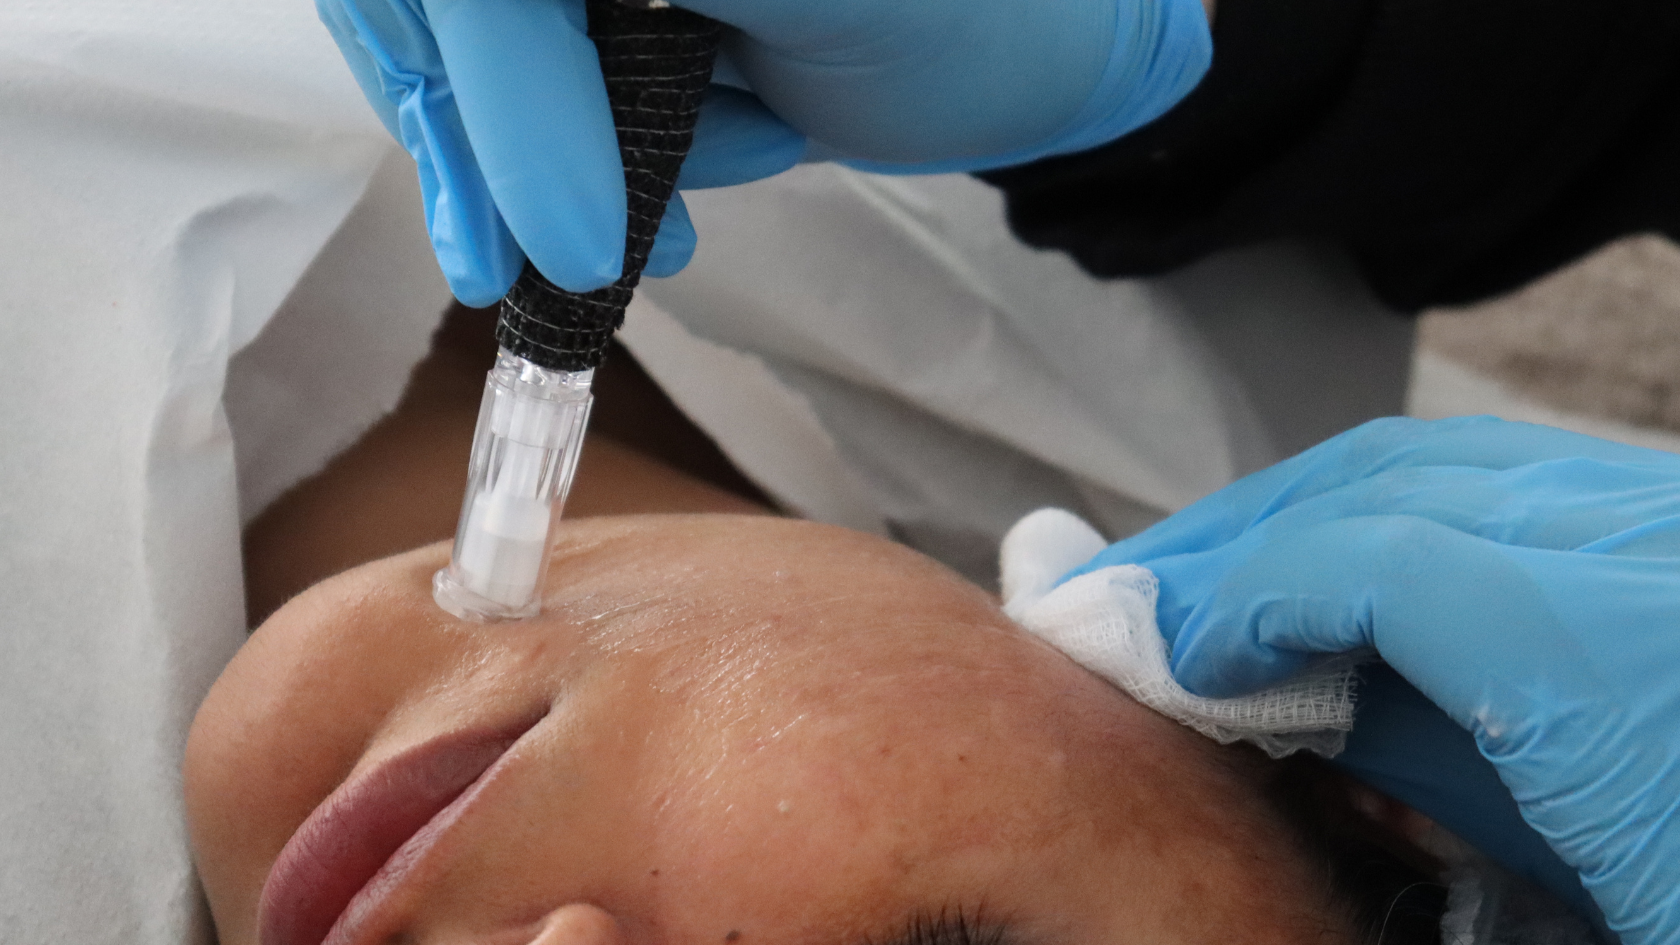 What qualifications do I need to offer microneedling treatment in the UK?